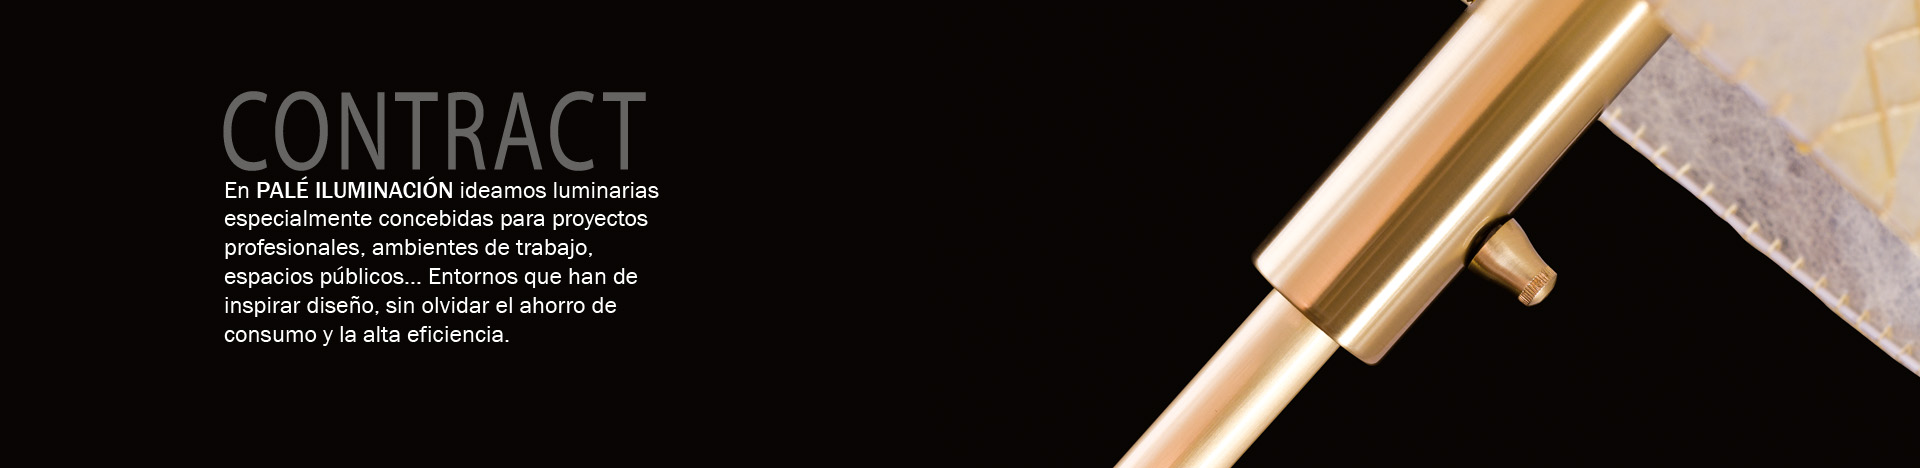 banner_contract1